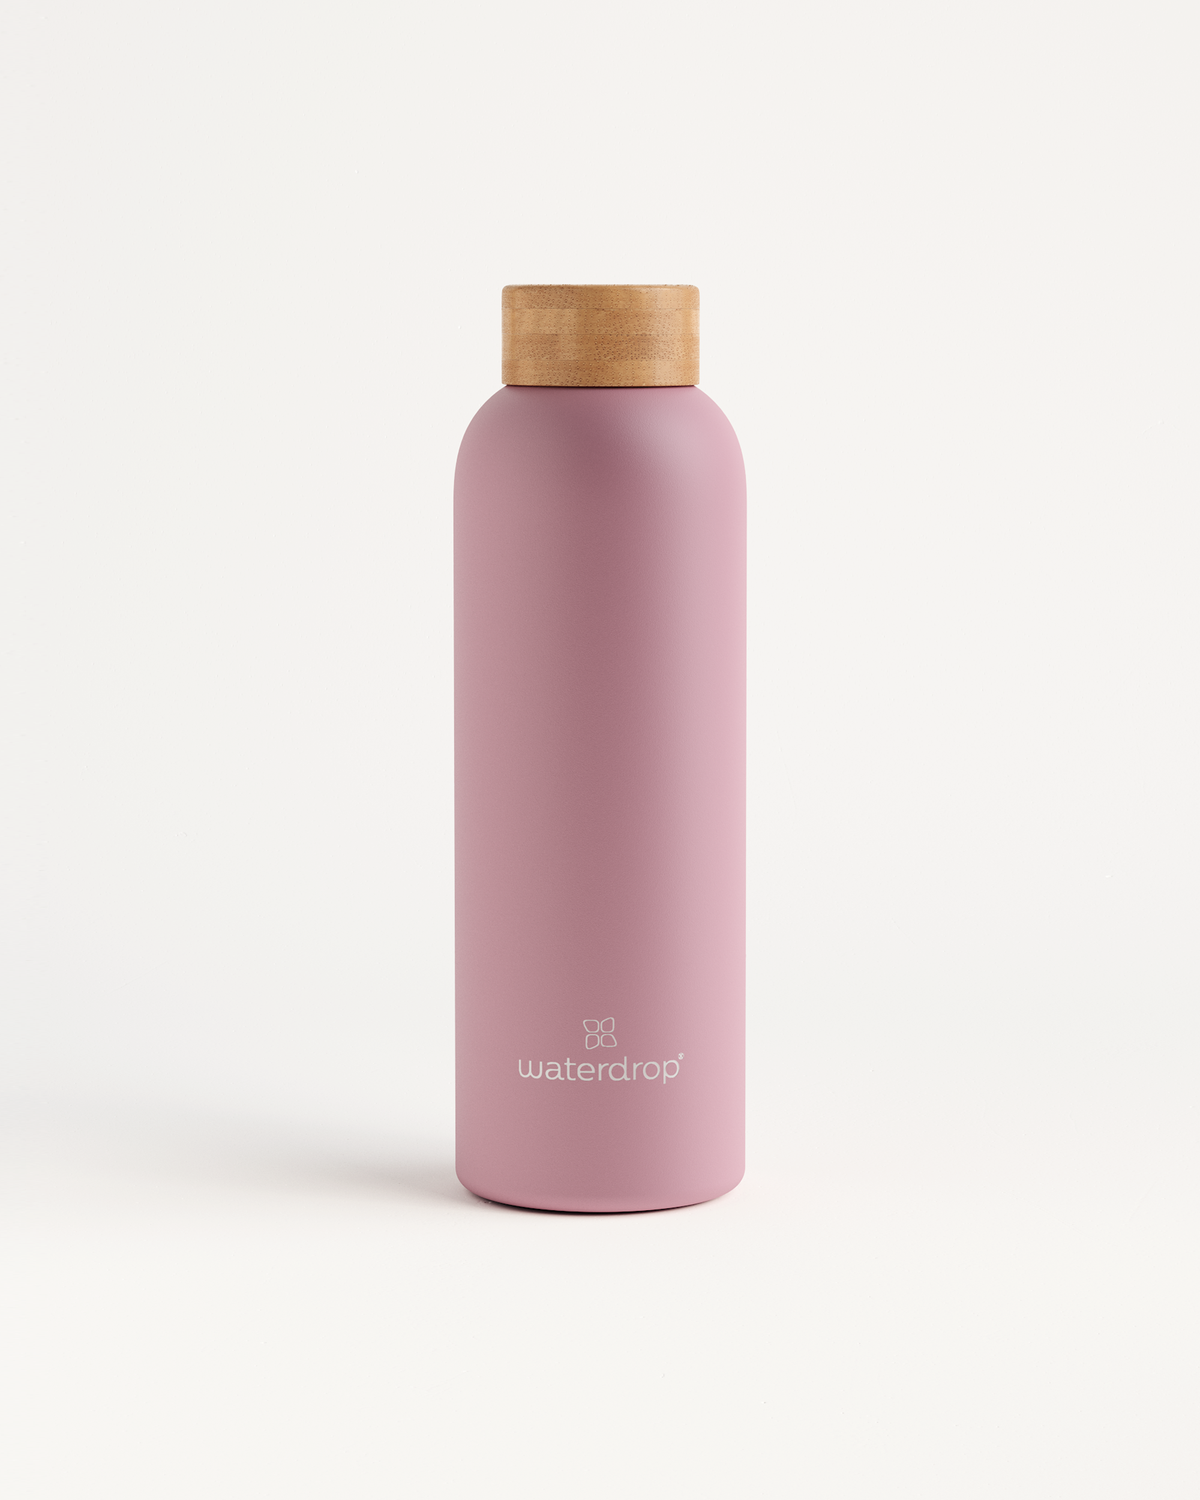 Thermos Stainless Steel Vacuum Insulated Straw Bottle - Pink, Count of: 1 -  Pick 'n Save